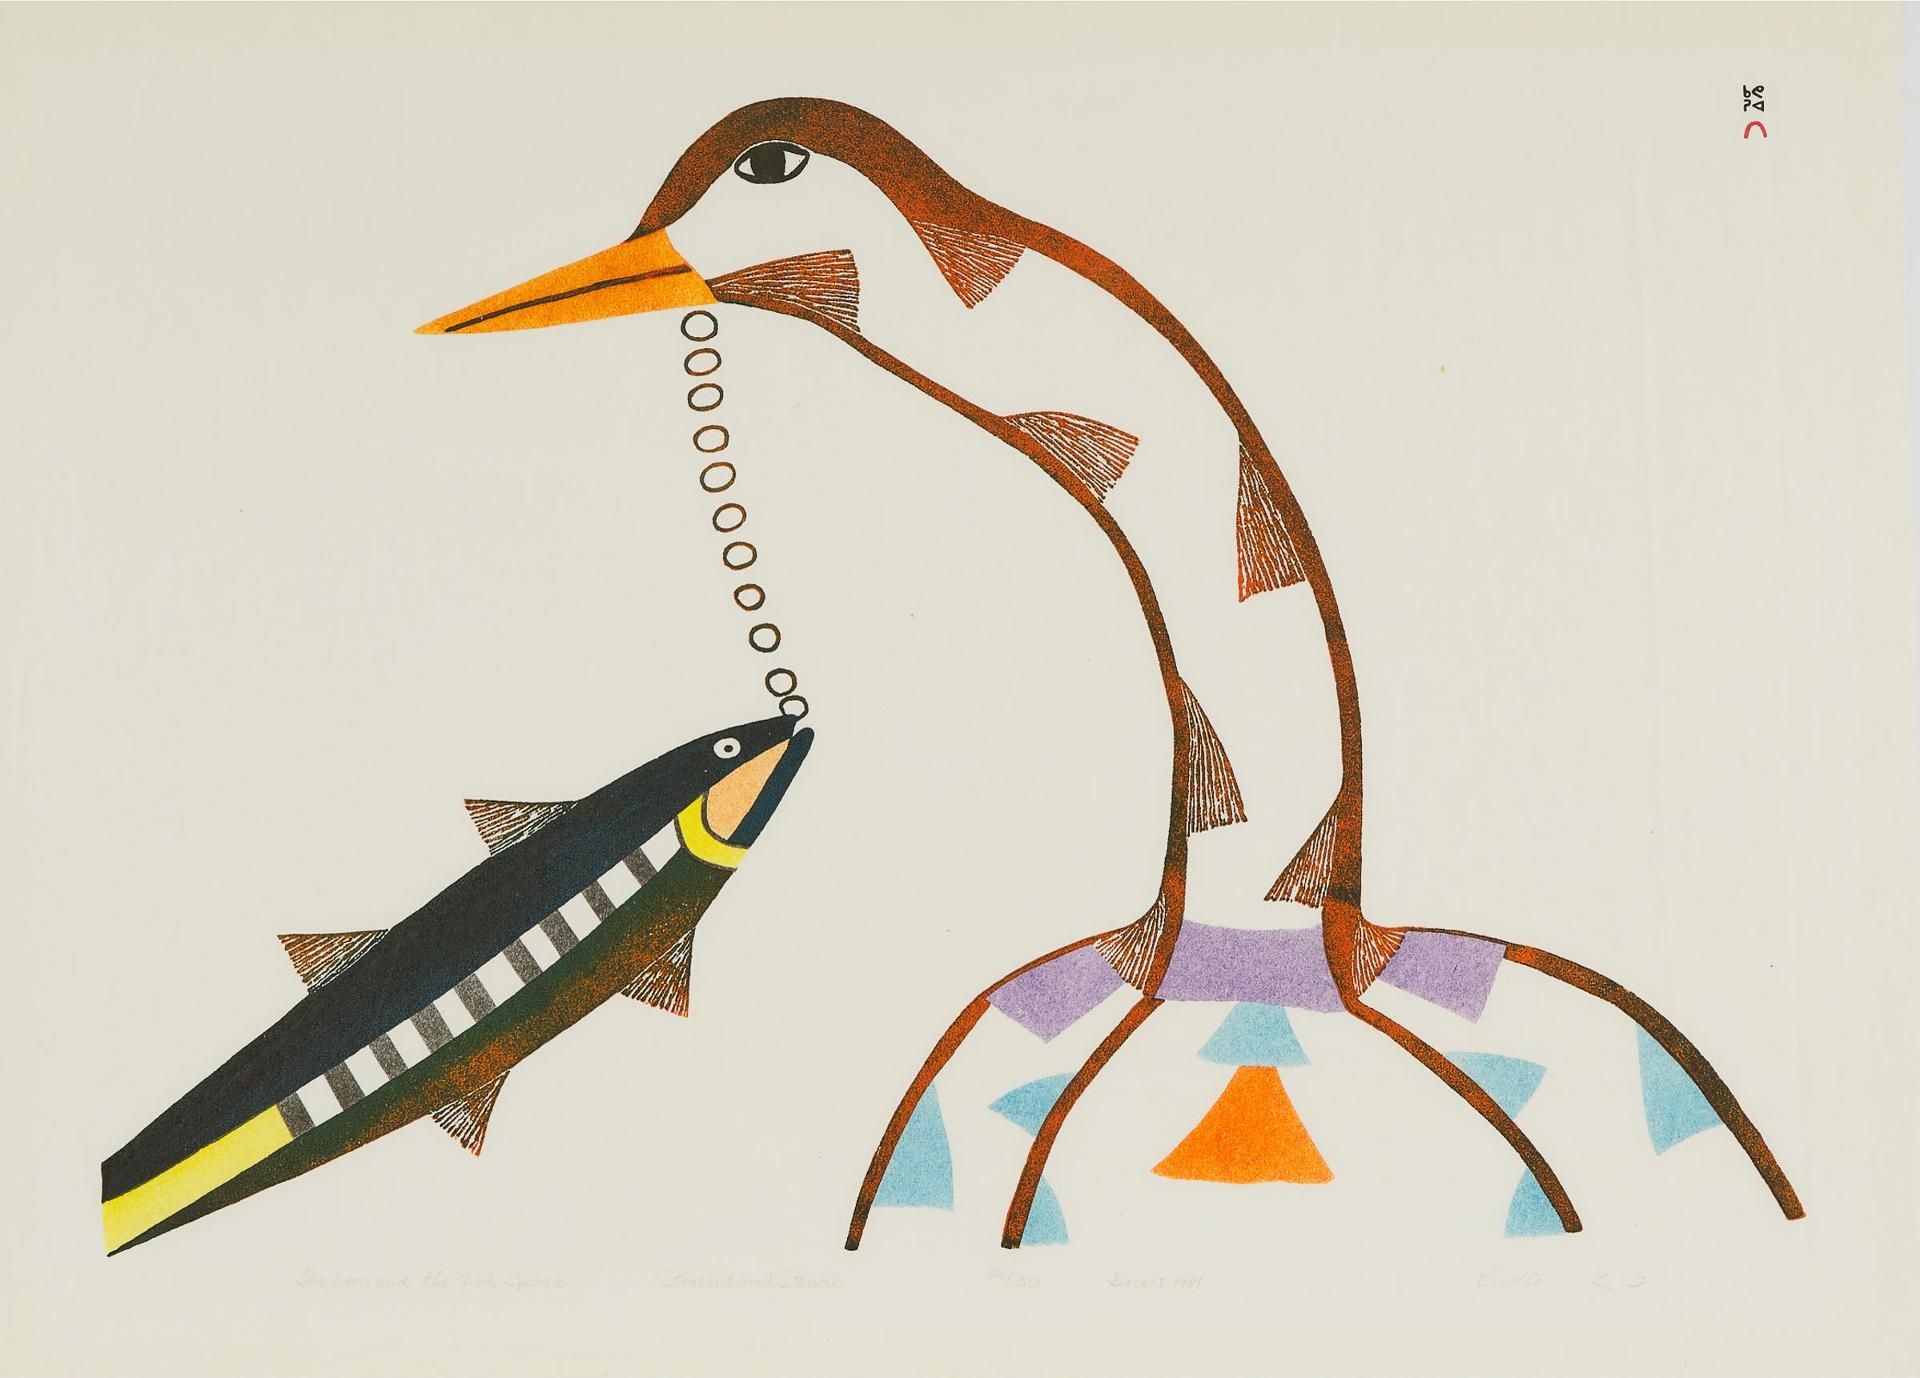 Pudlo Pudlat (1916-1992) - The Loon And The Fish Speak